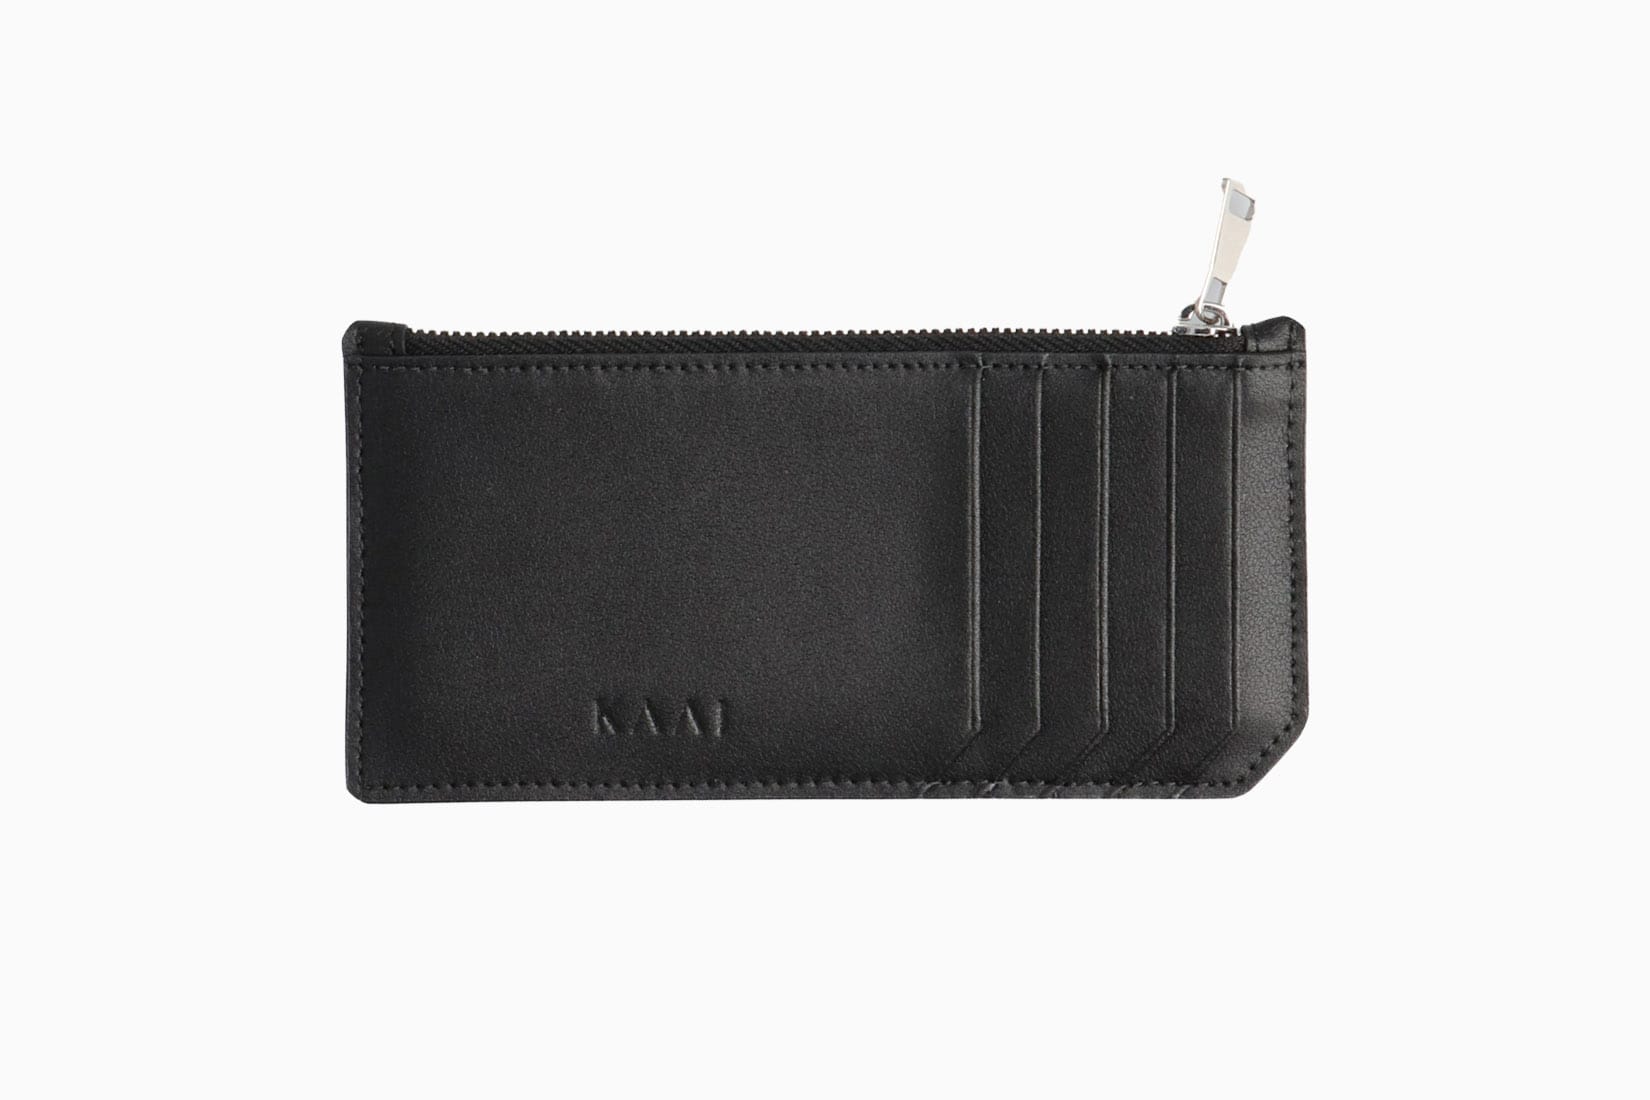 Wallet style